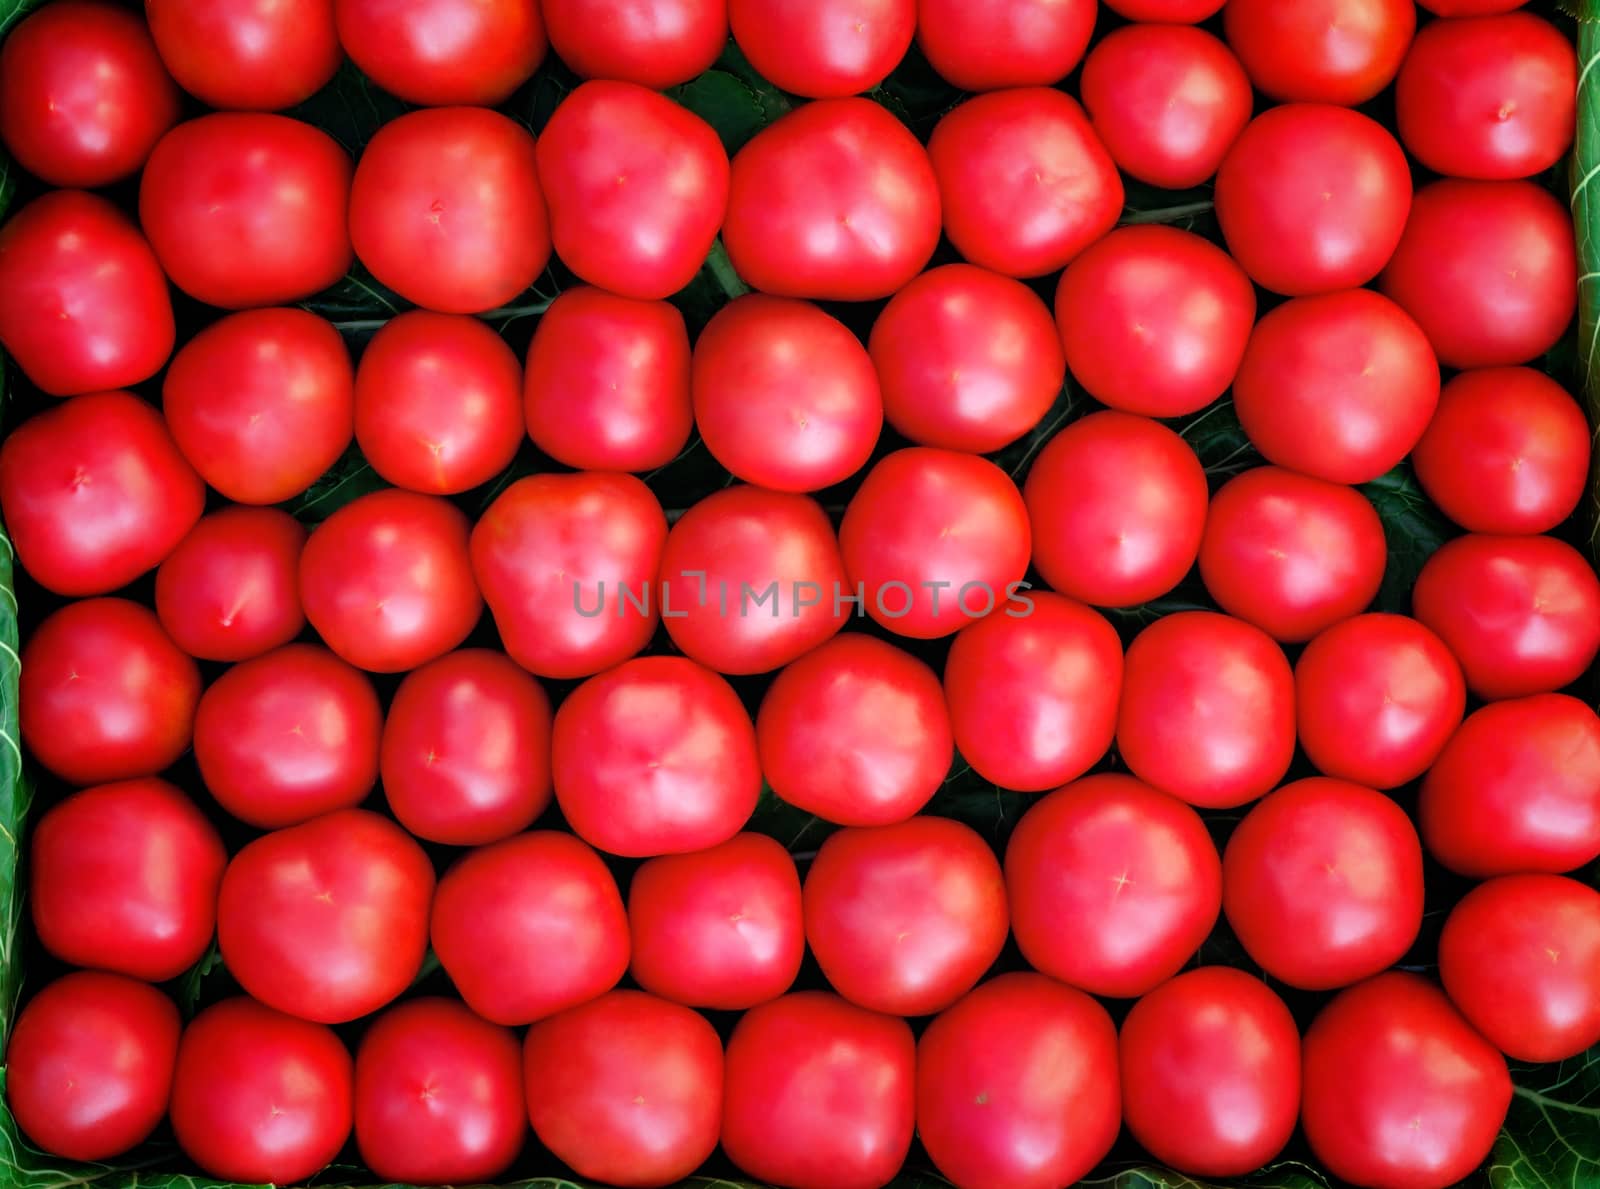 A large number ripe bright red tomato lie on a shop show-window.